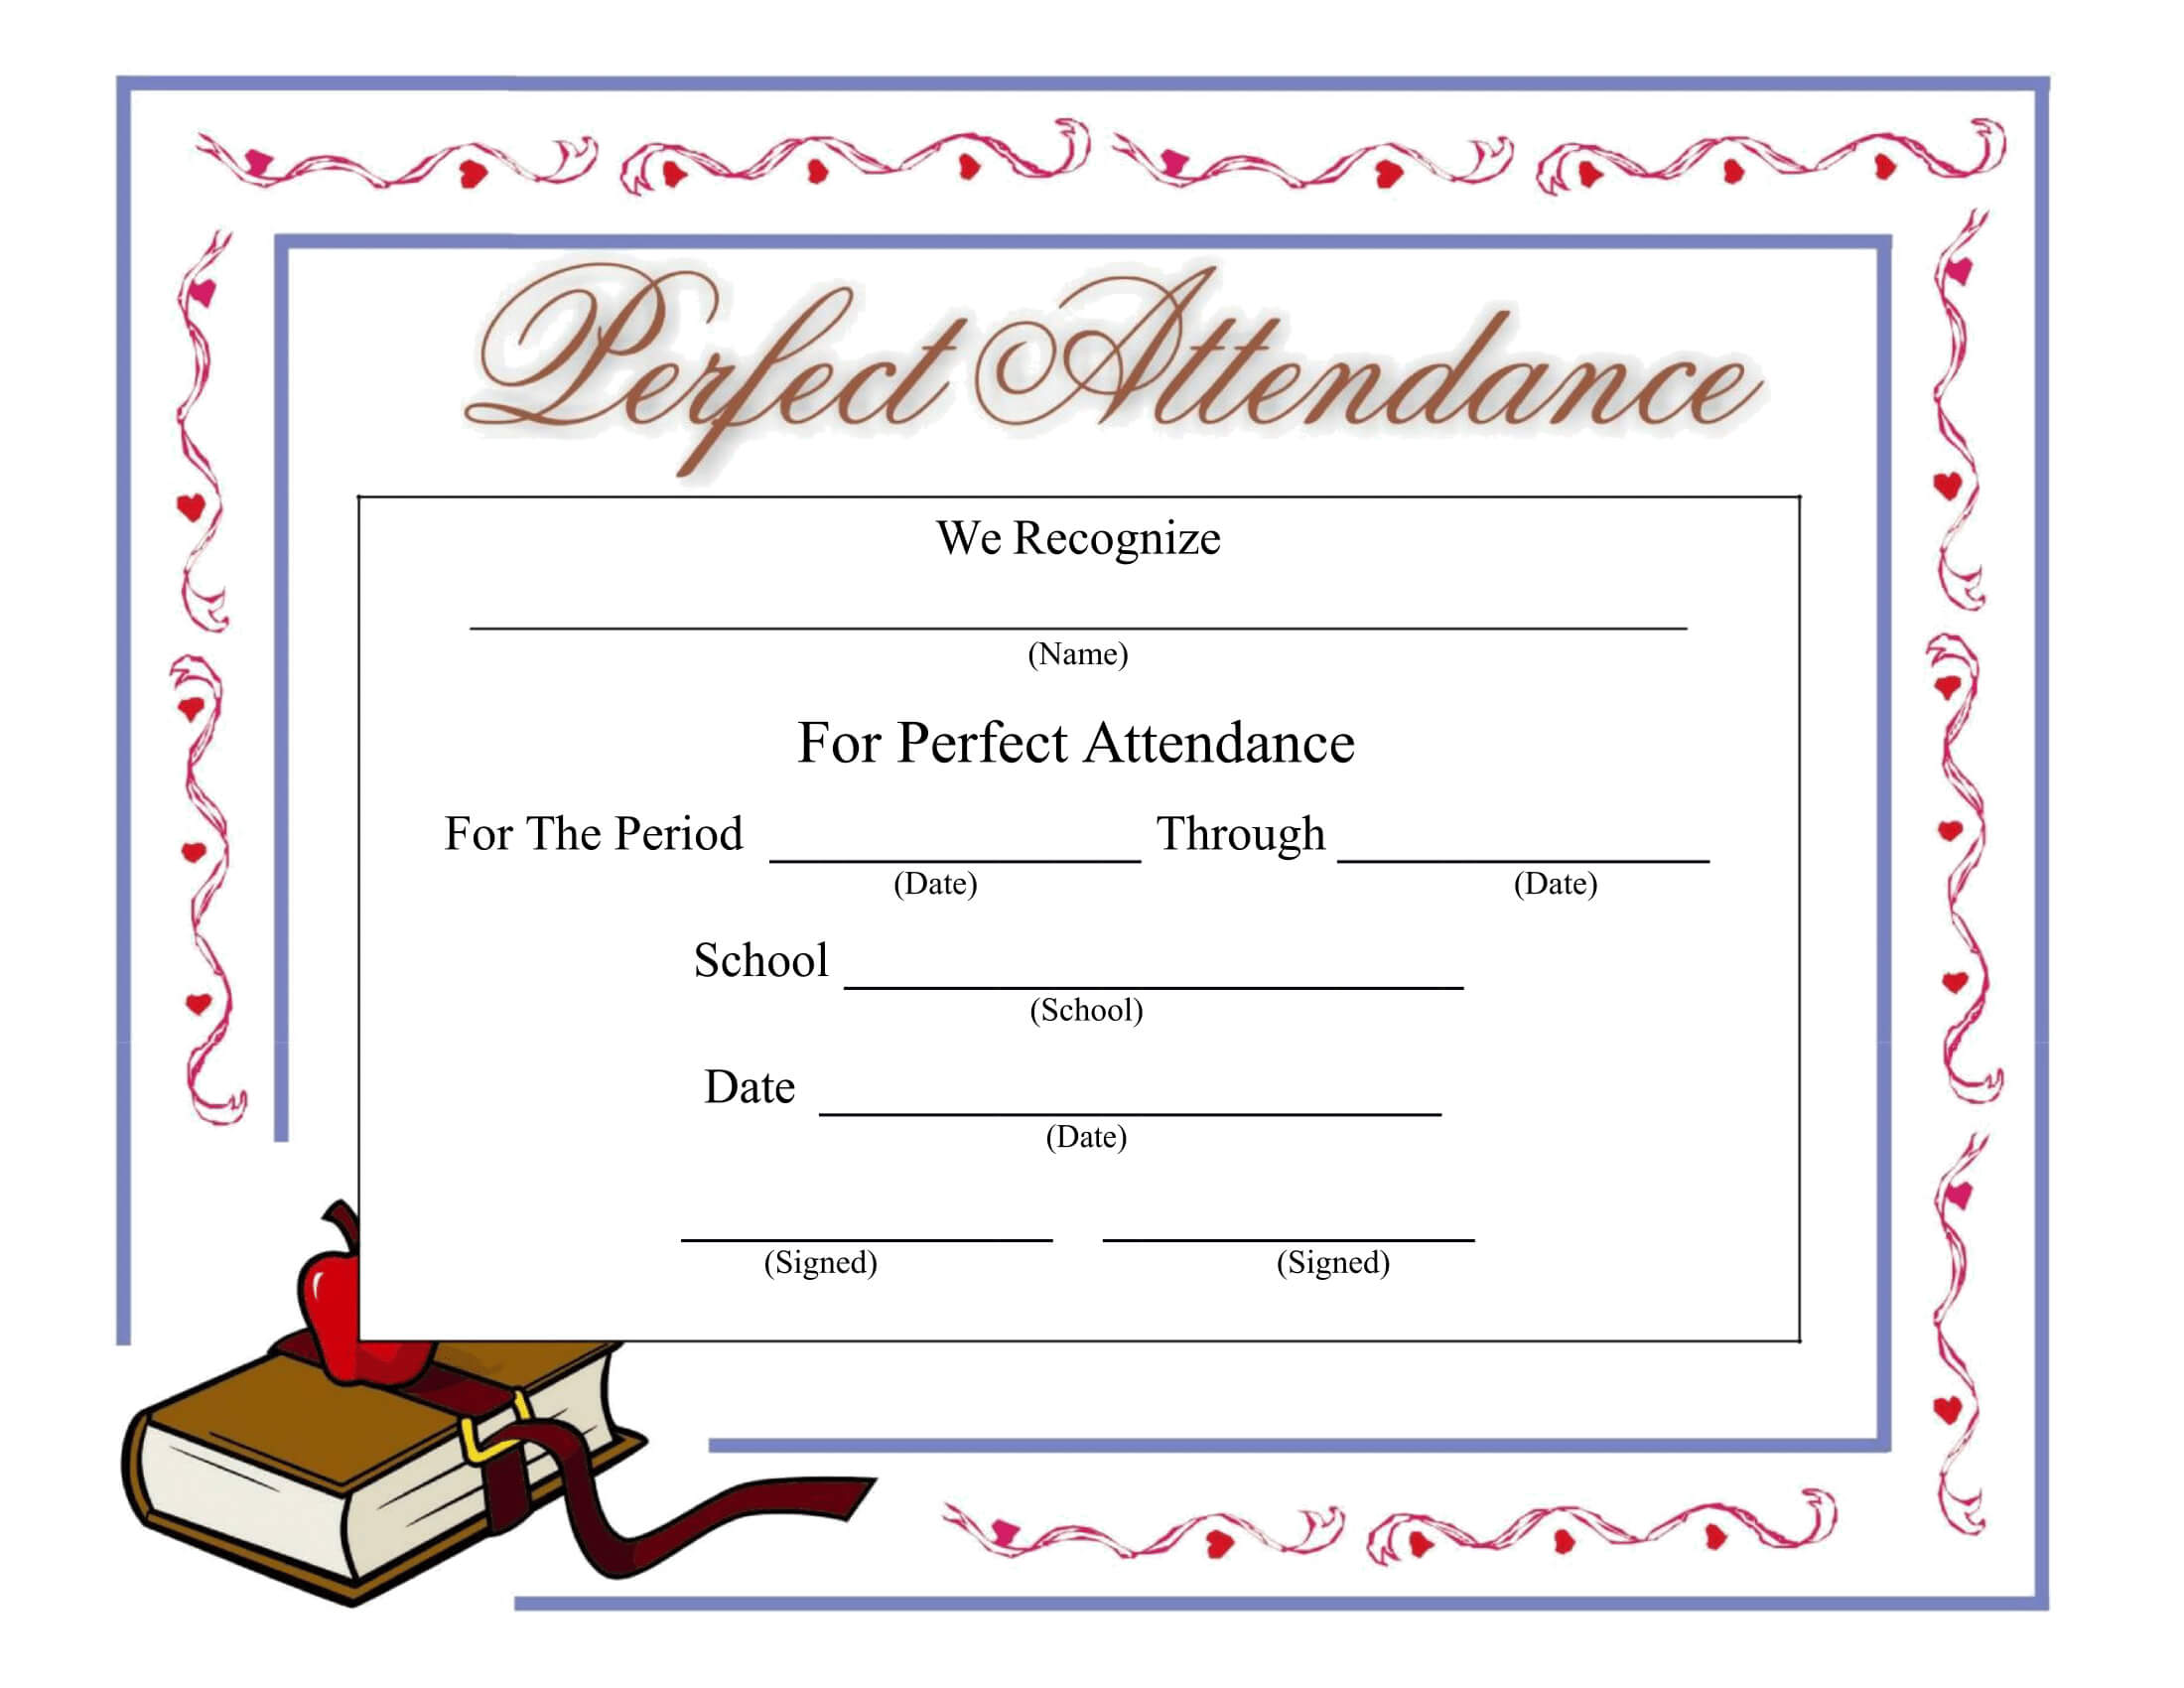 Perfect Attendance Certificate - Download A Free Template Inside Perfect Attendance Certificate Free Template